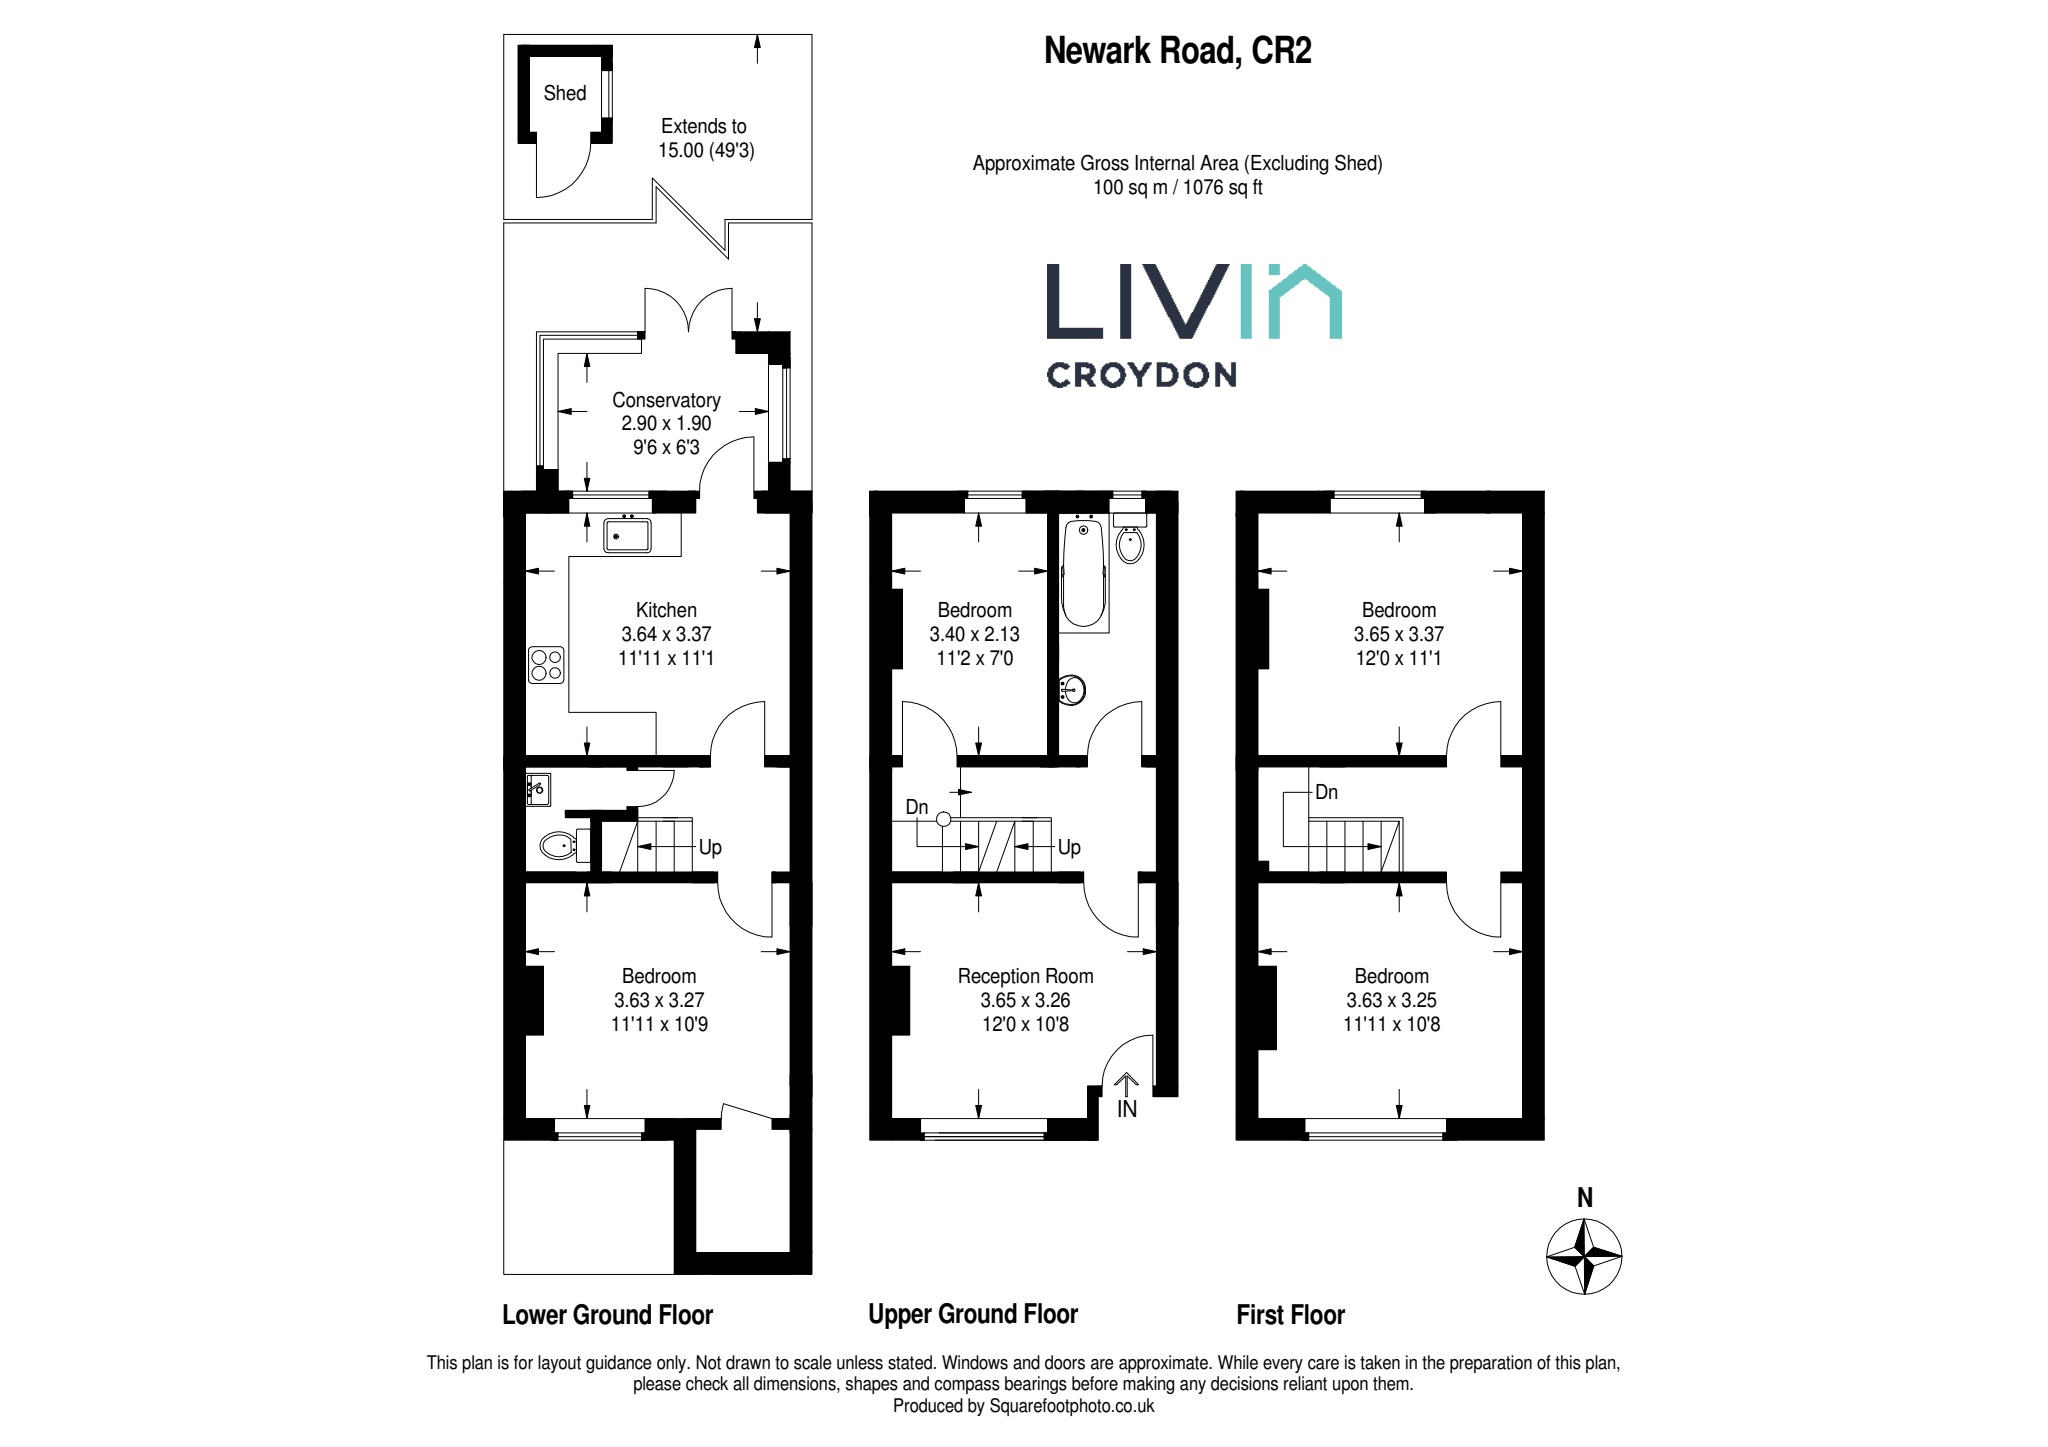 3 bed terraced house for sale in Newark Road, South Croydon - Property floorplan